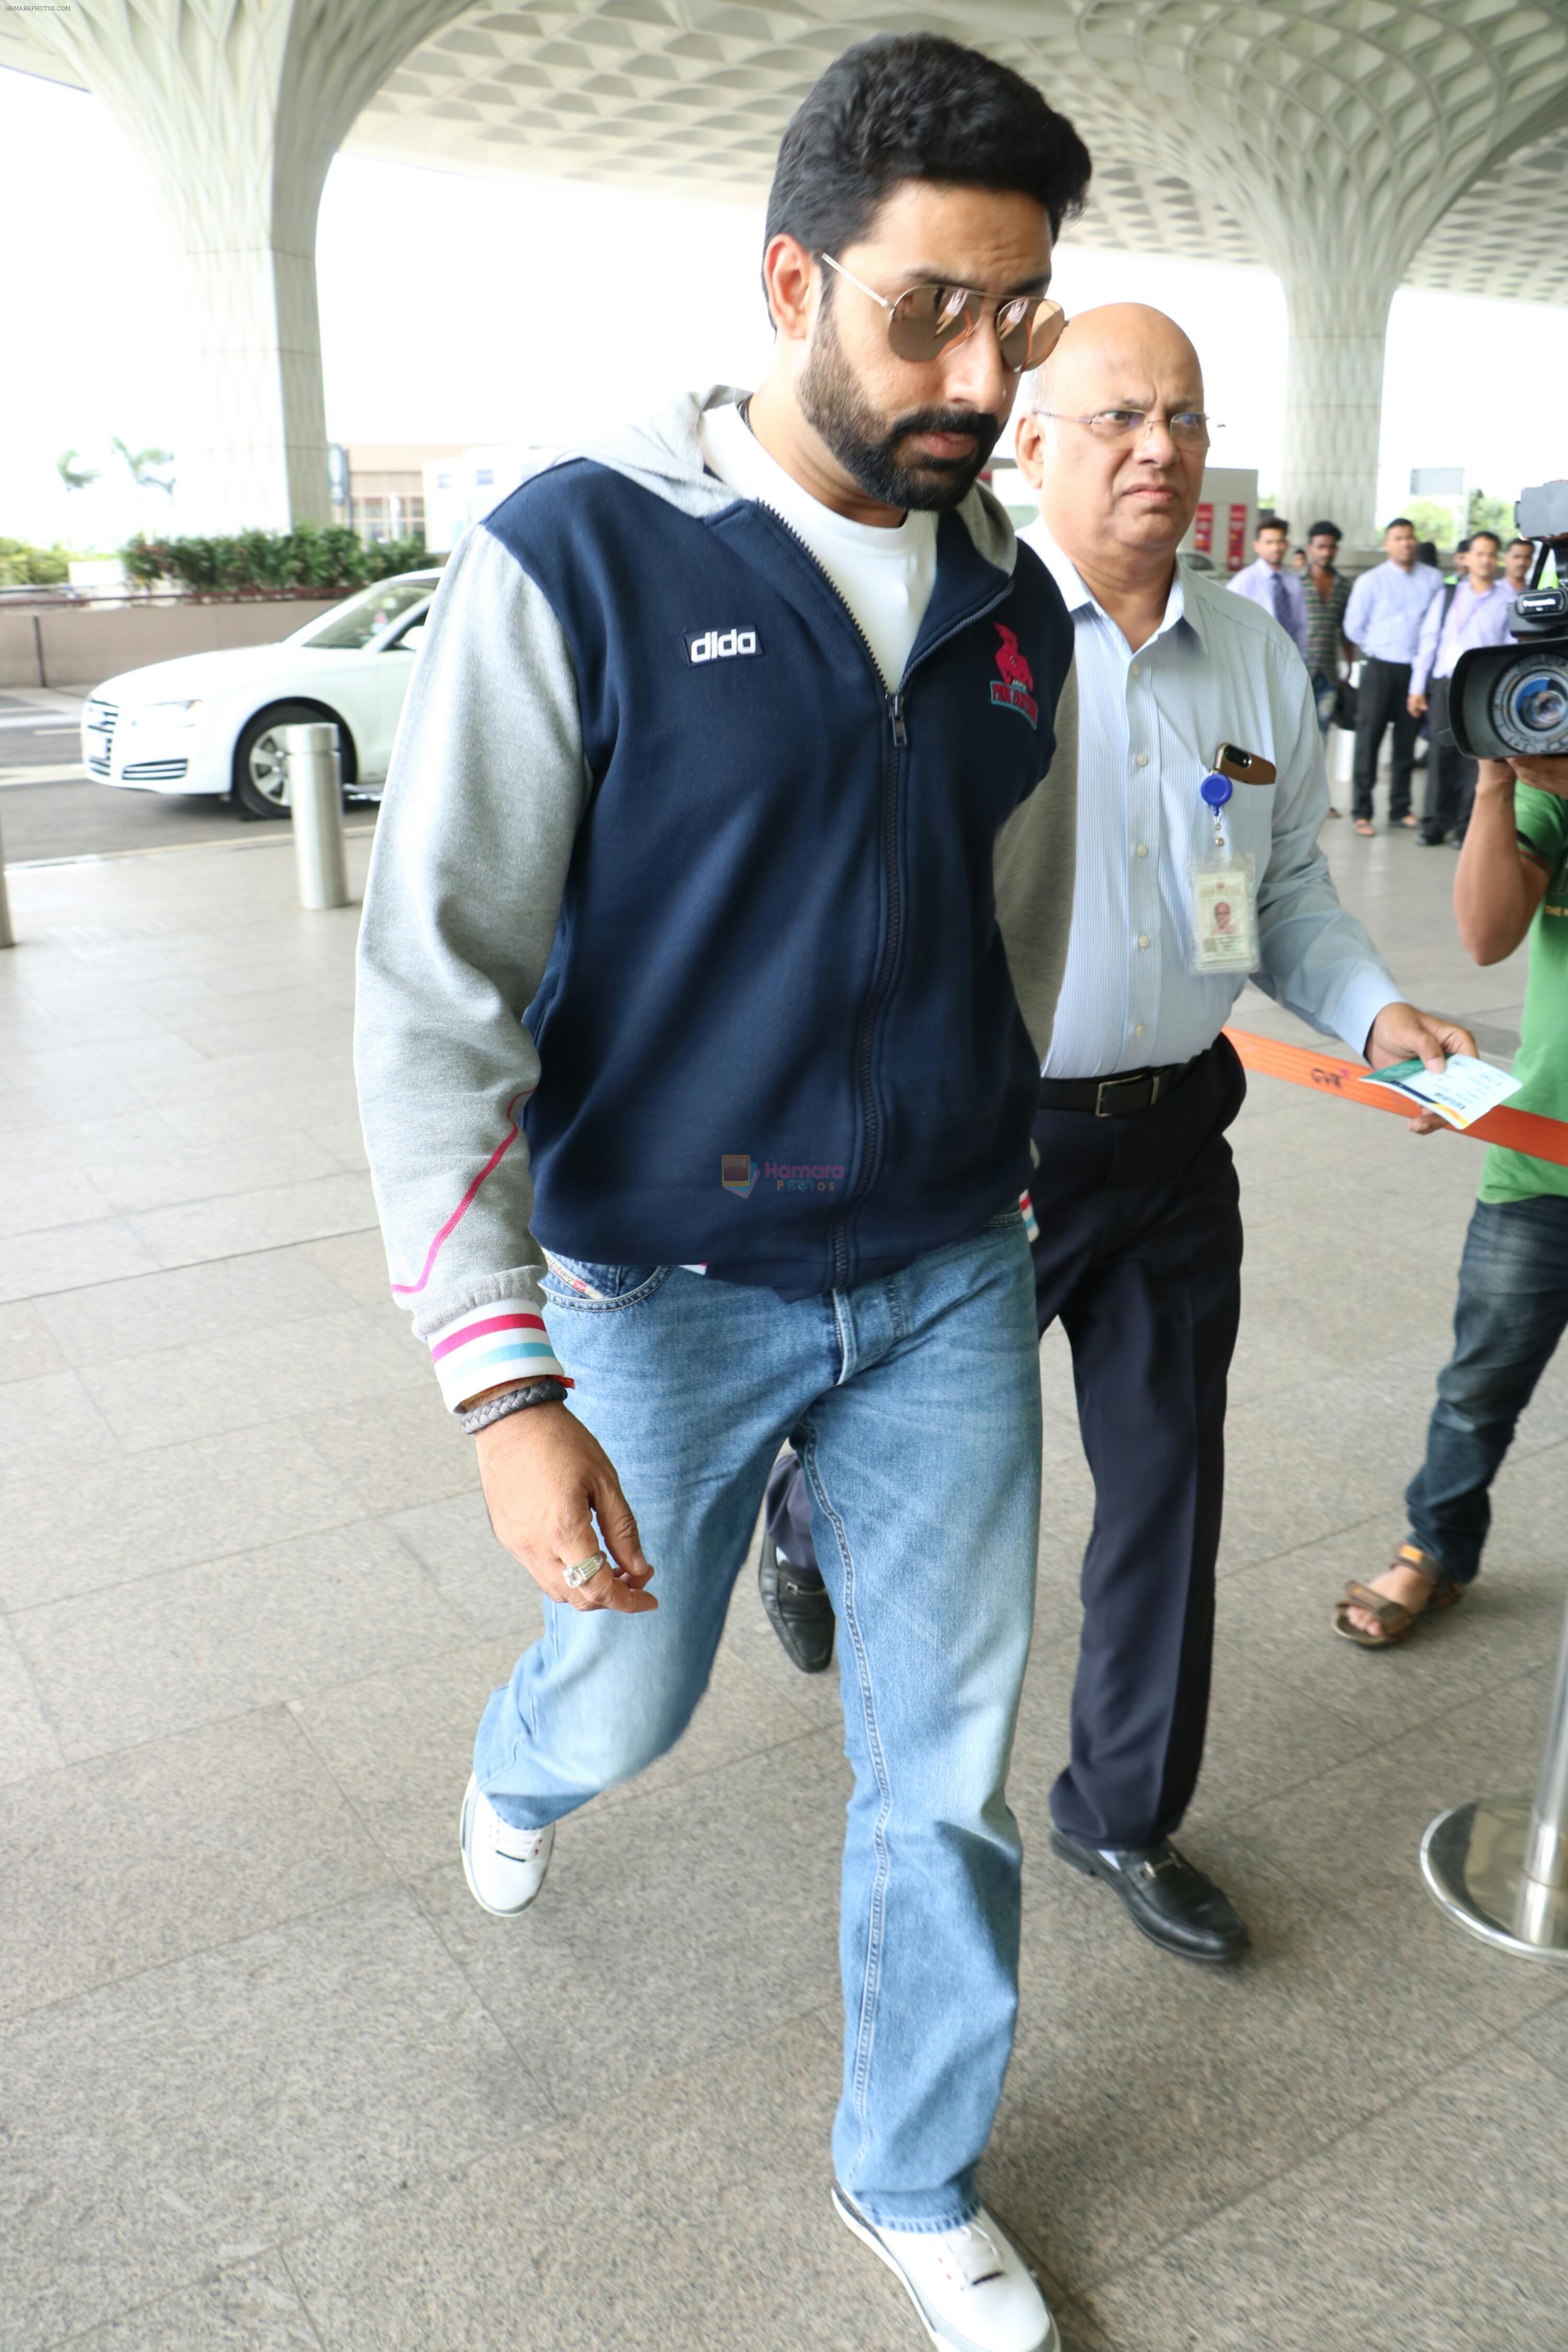 Abhishek Bachchan Spotted At Airport on 27th July 2017